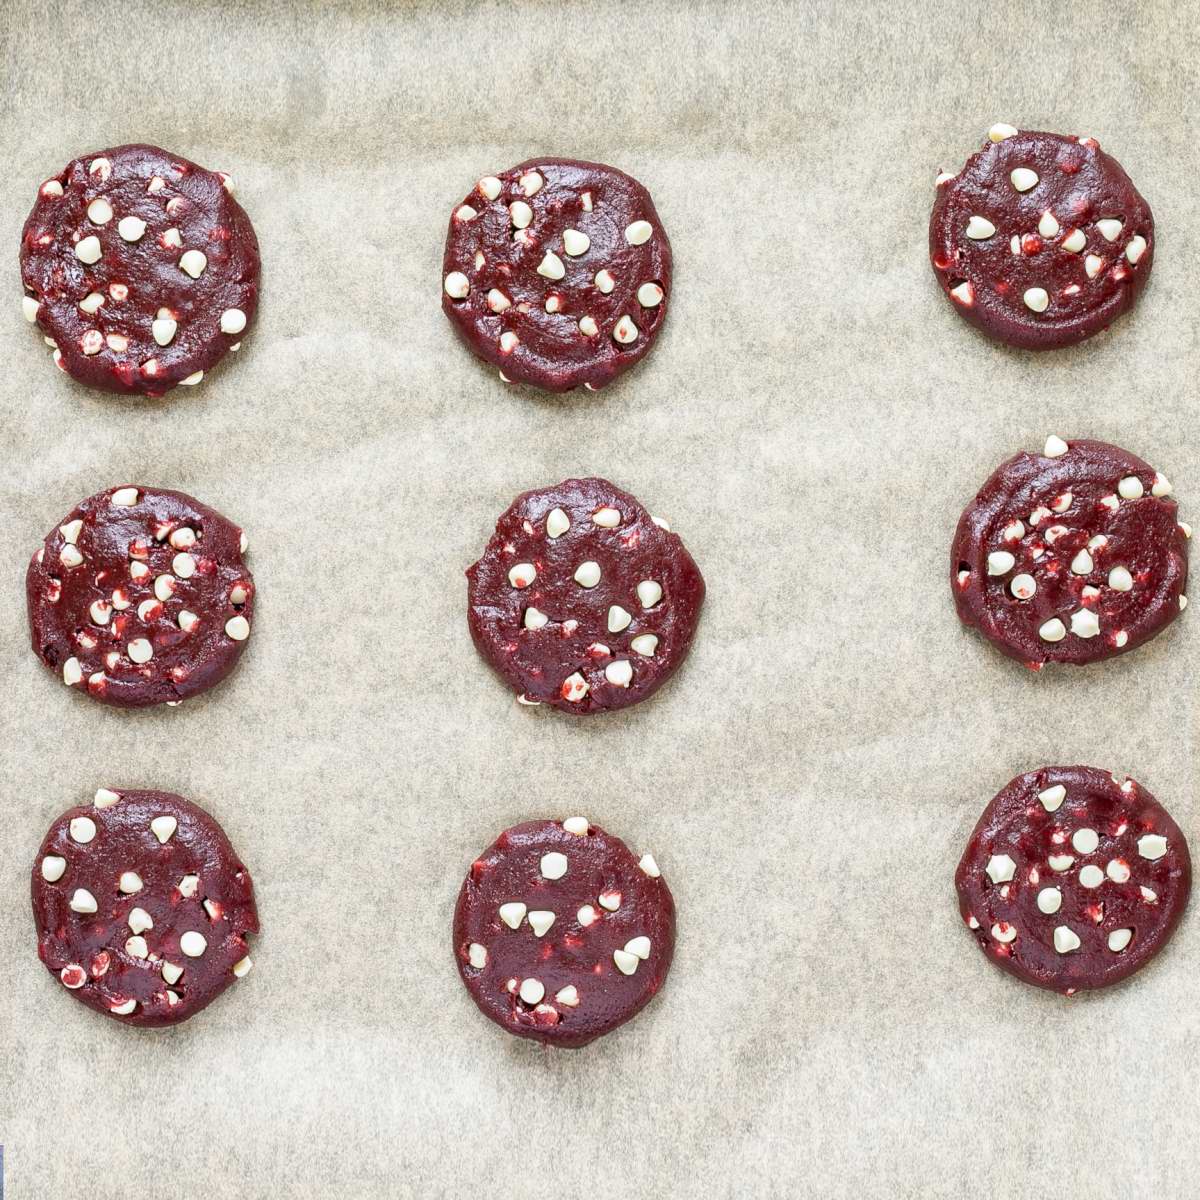 Unbaked round vibrant red cookie batters with white chocolate chips on parchment paper neatly placed away from each other.